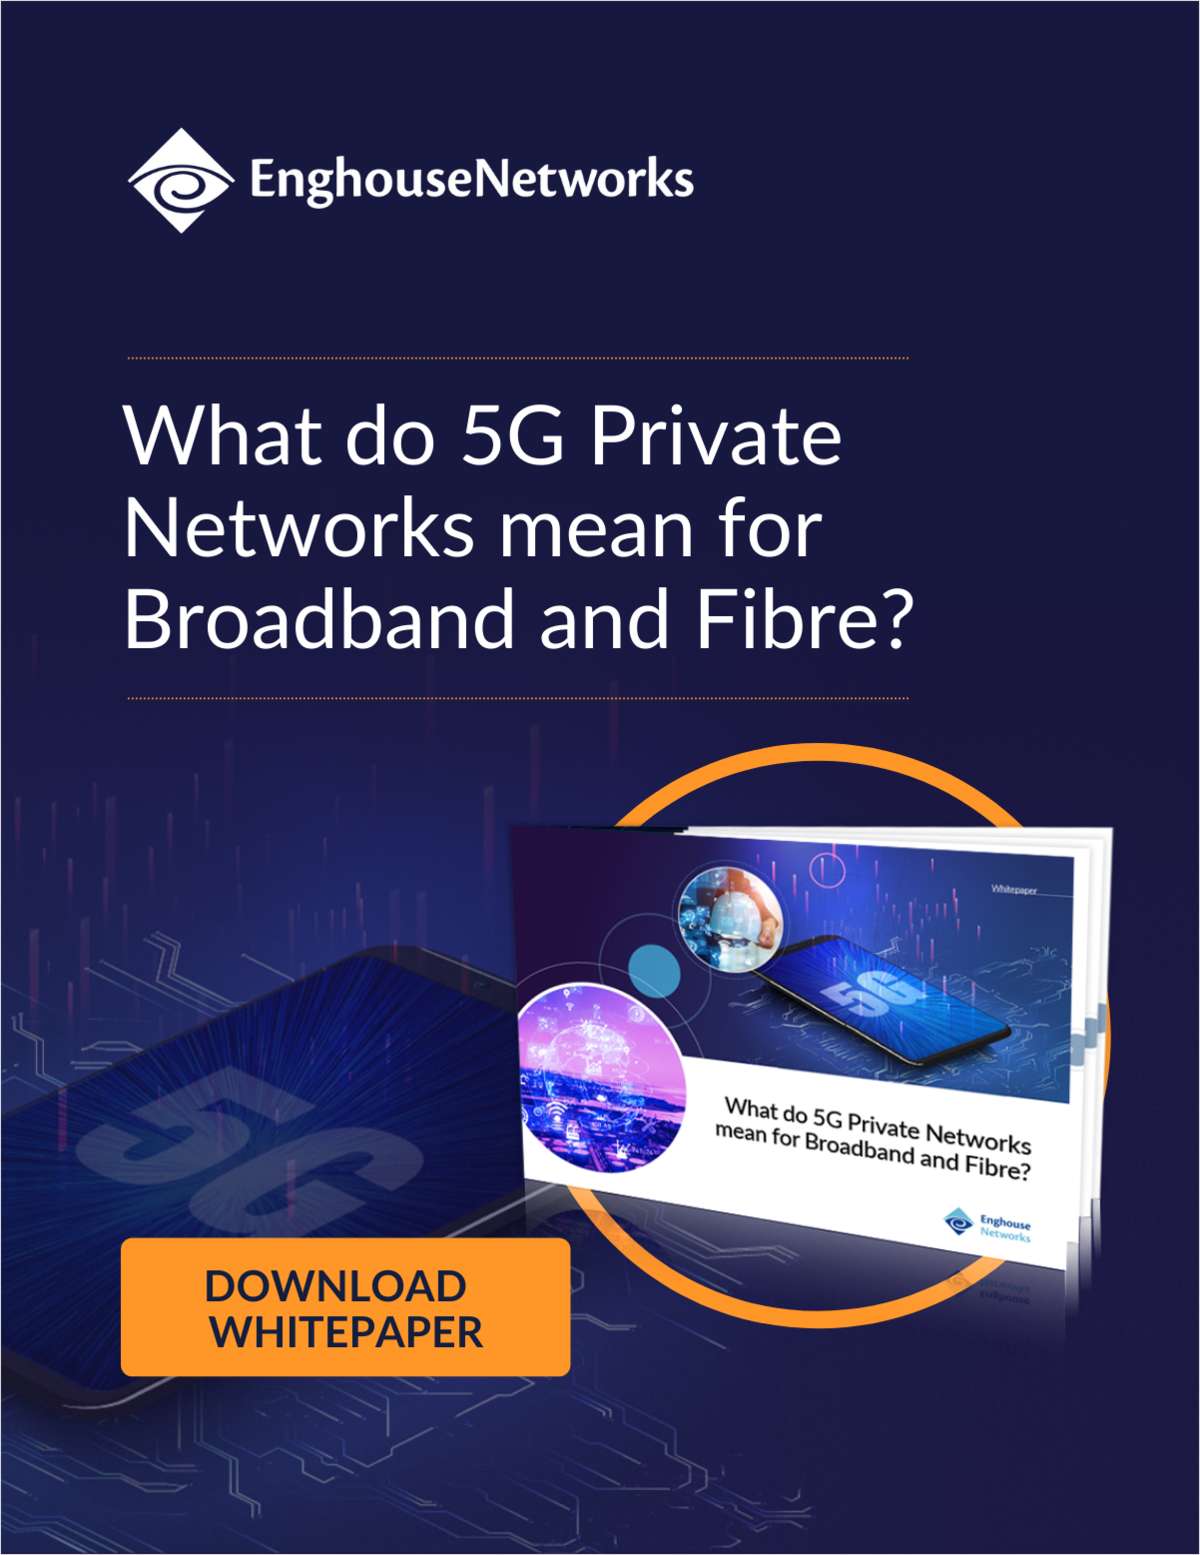 What do 5G Private Networks mean for Broadband and Fibre?